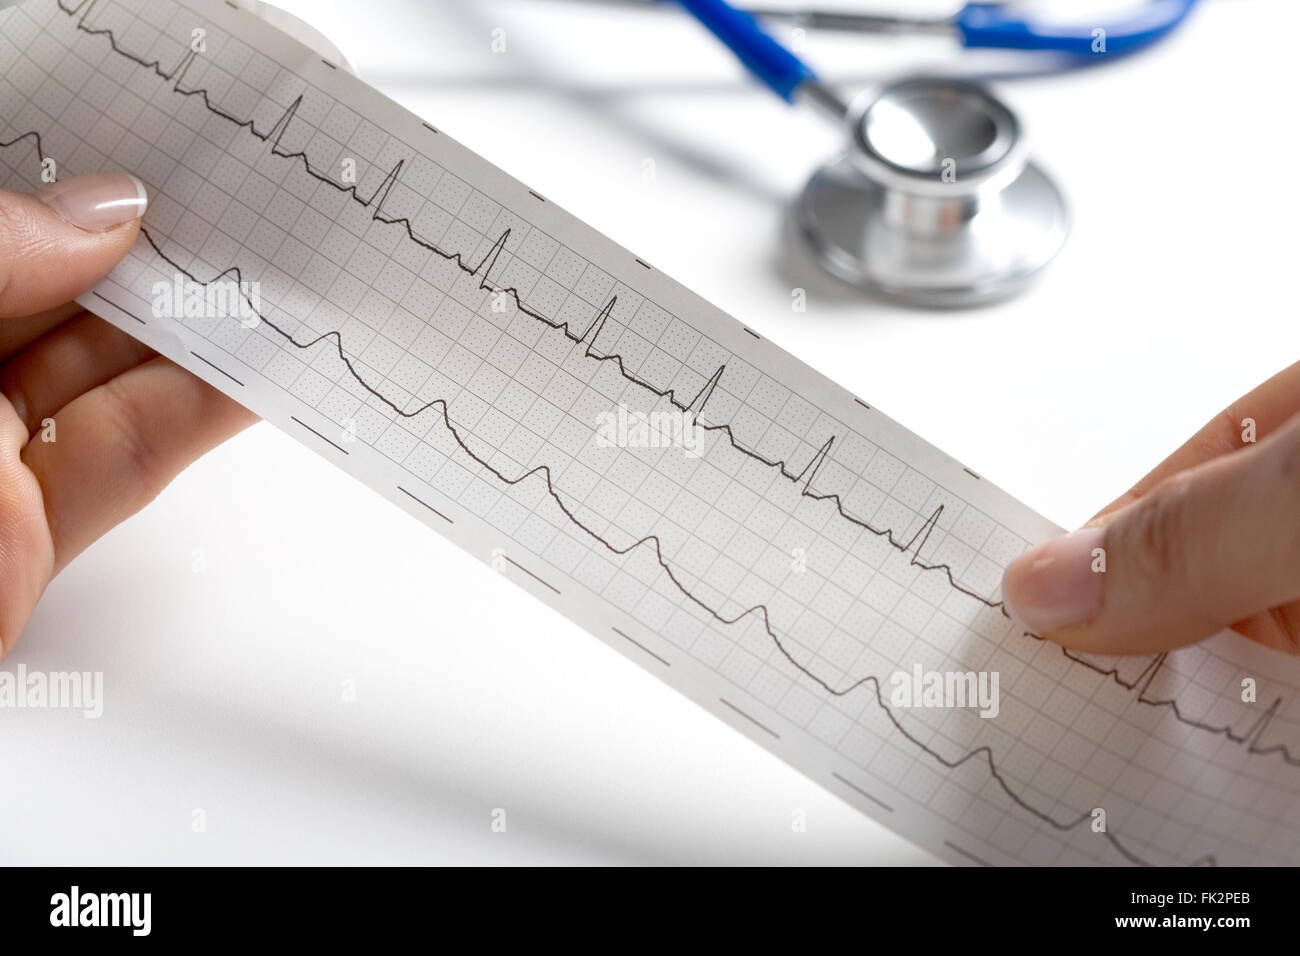 Hands Holding A Regular Ecg With A Stethoscope In The Background Stock Photo